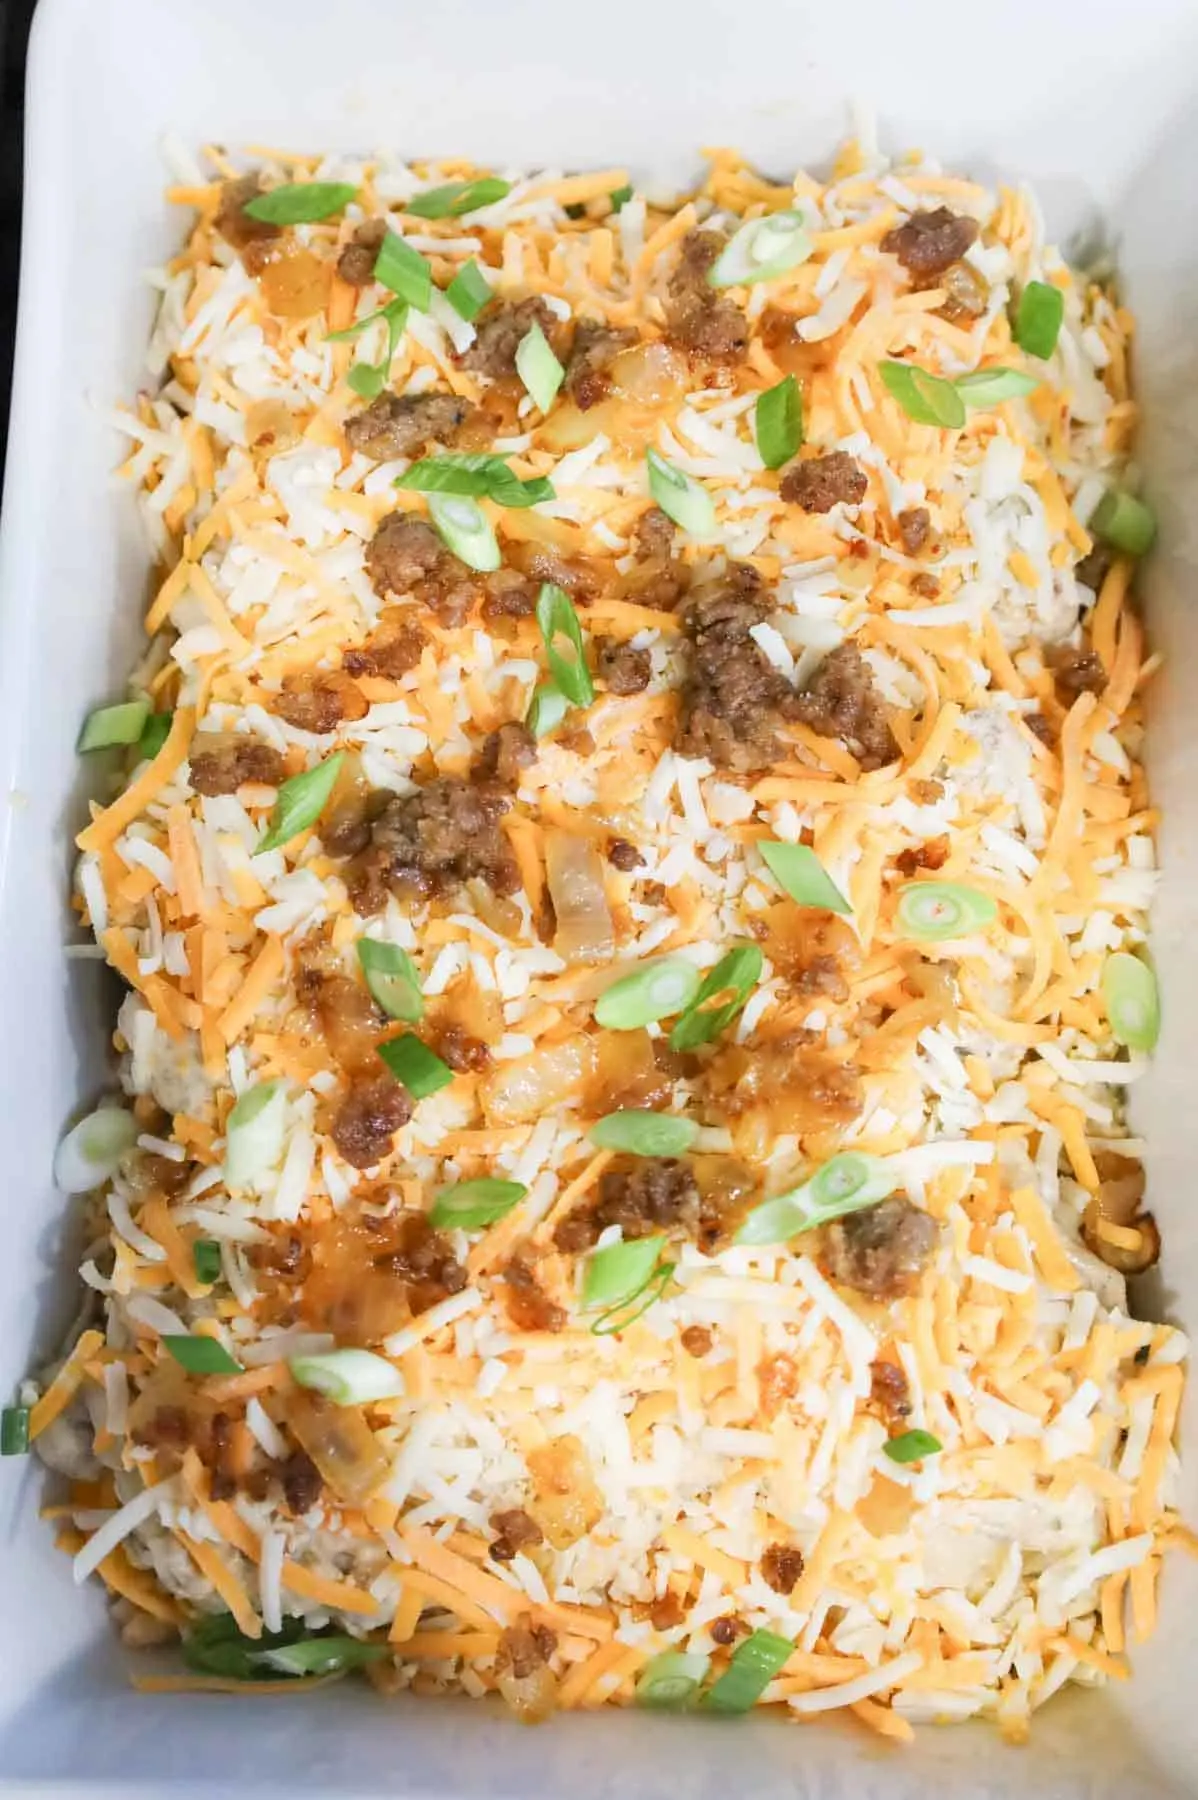 crumbled sausage, green onions and shredded cheese on top of pierogies in a baking dish